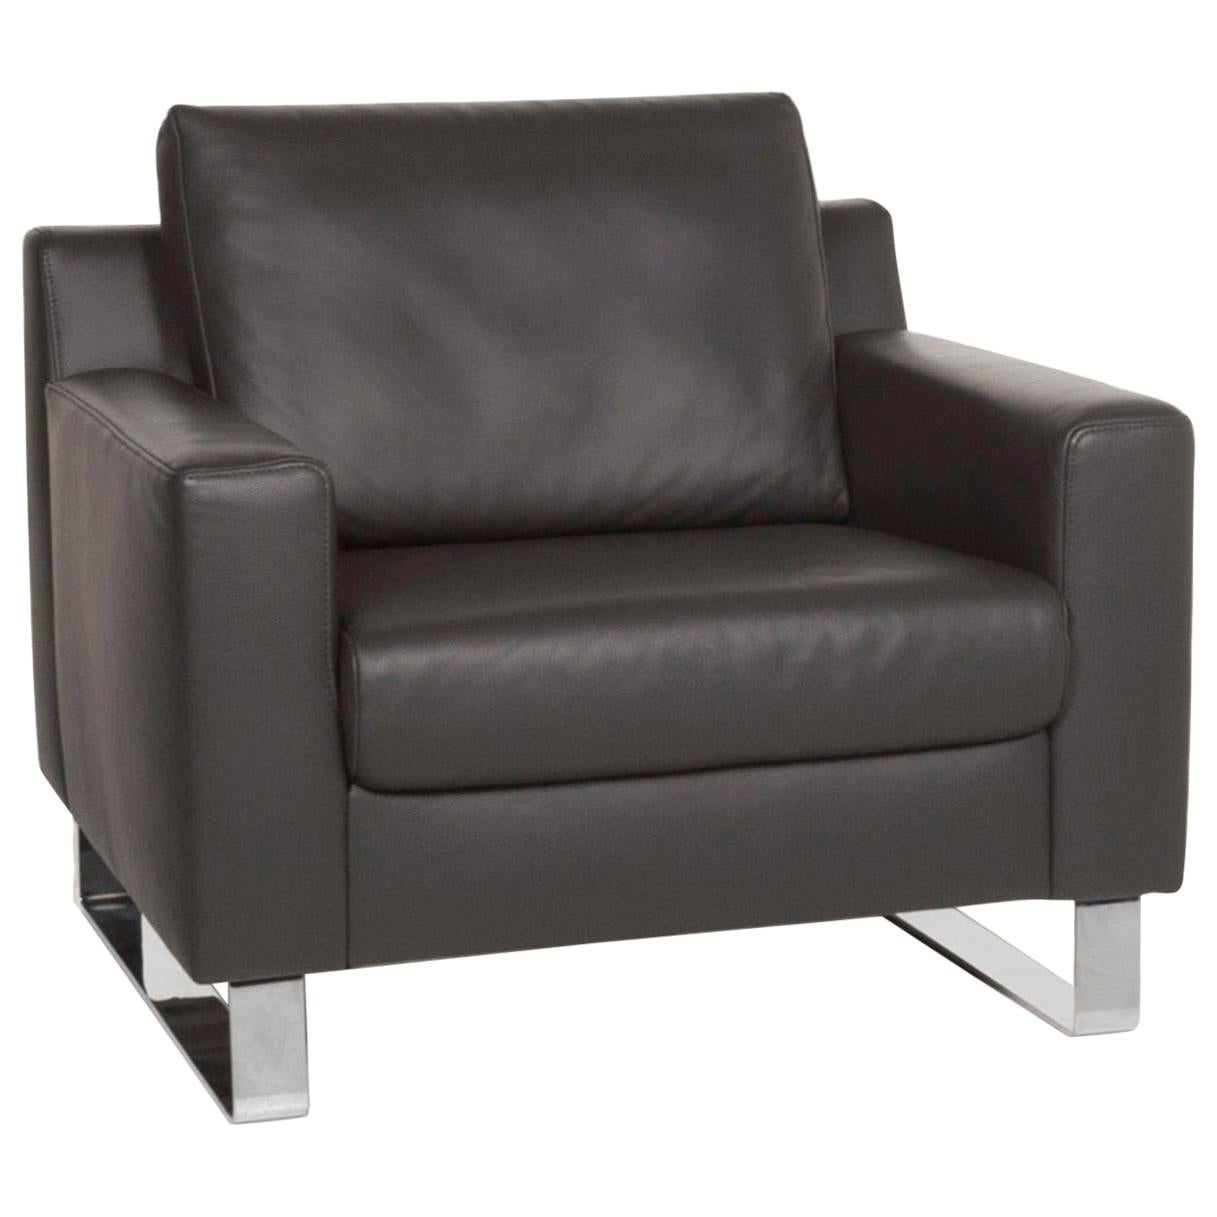 Ewald Schillig Leather Armchair Gray For Sale